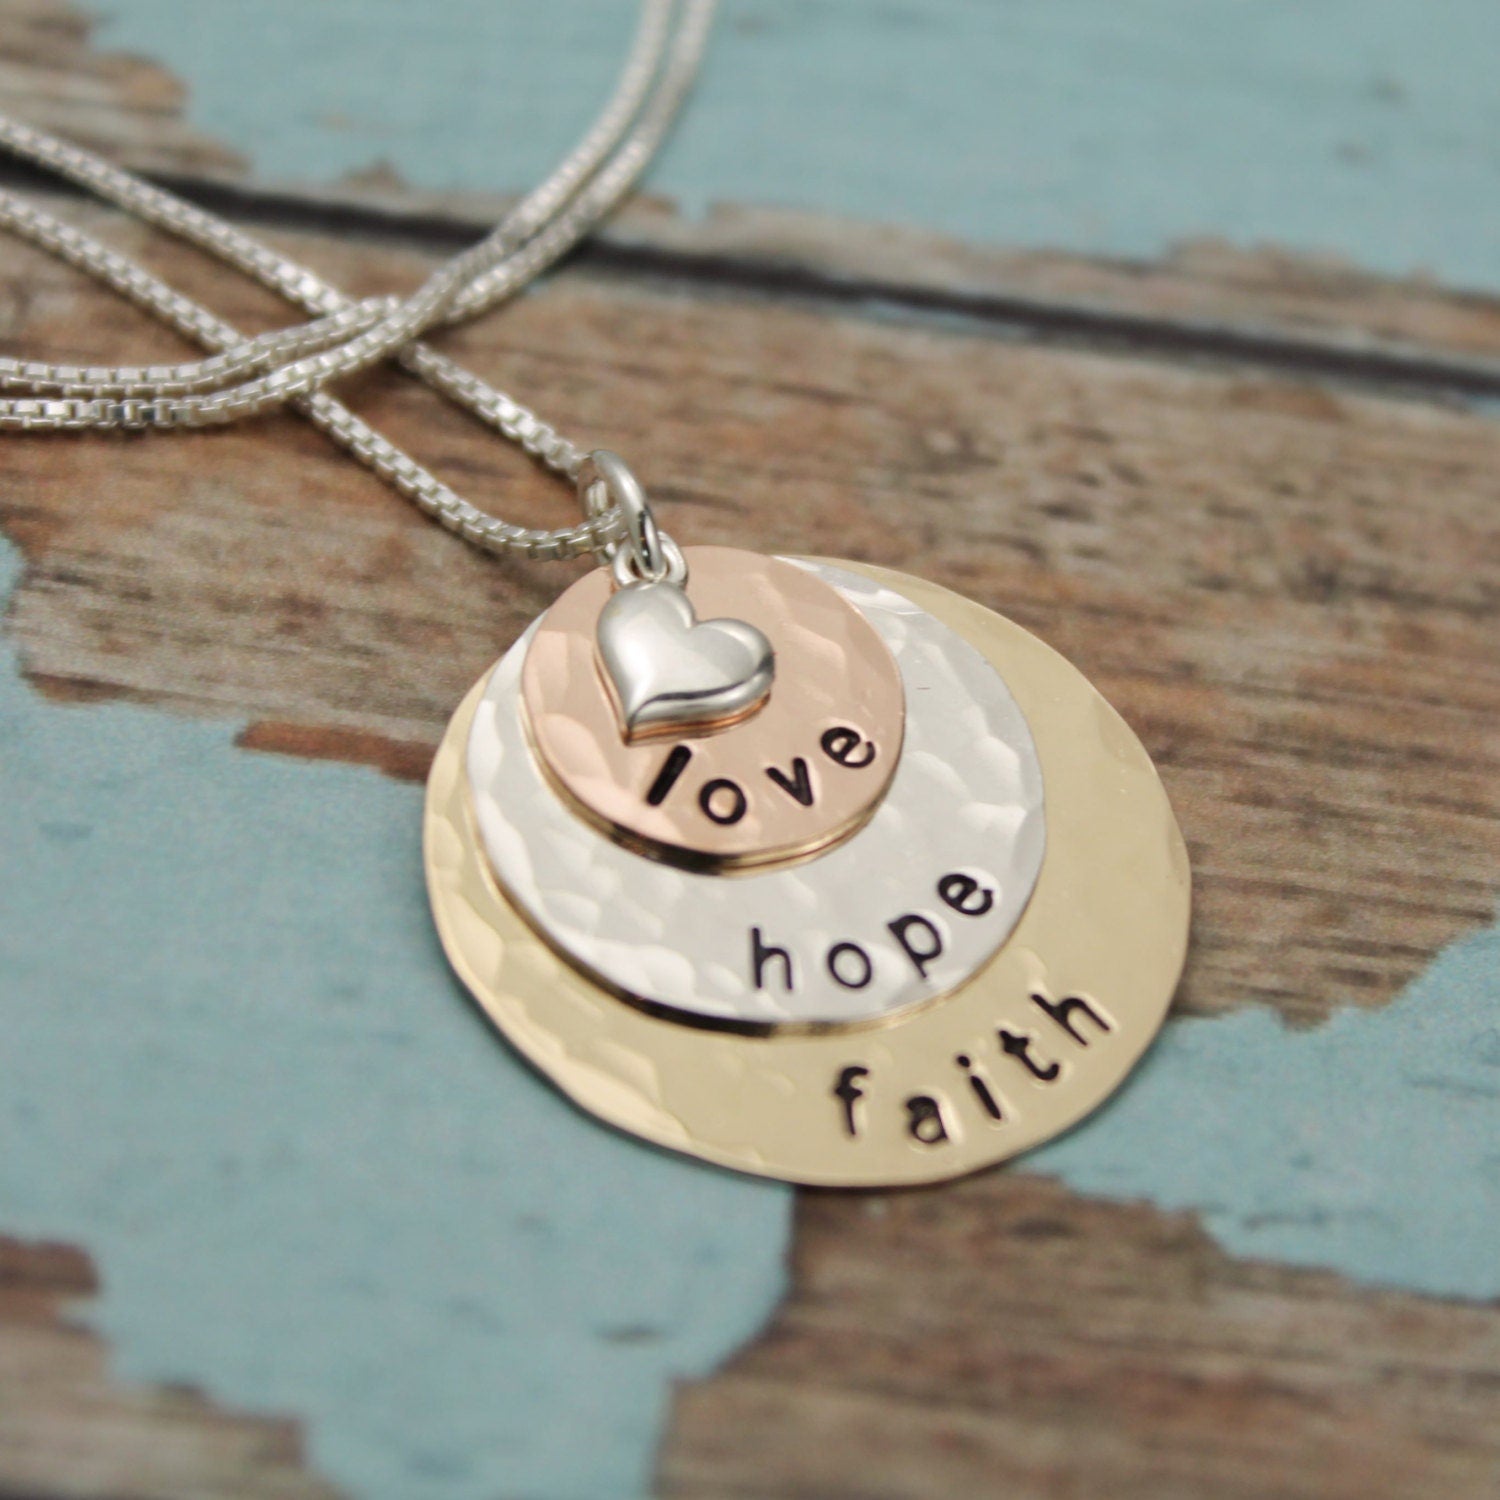 Grandma or Mommy Layered Personalized Necklace Hand Stamped Jewelry in Silver, Gold Filled, Rose Gold Filled